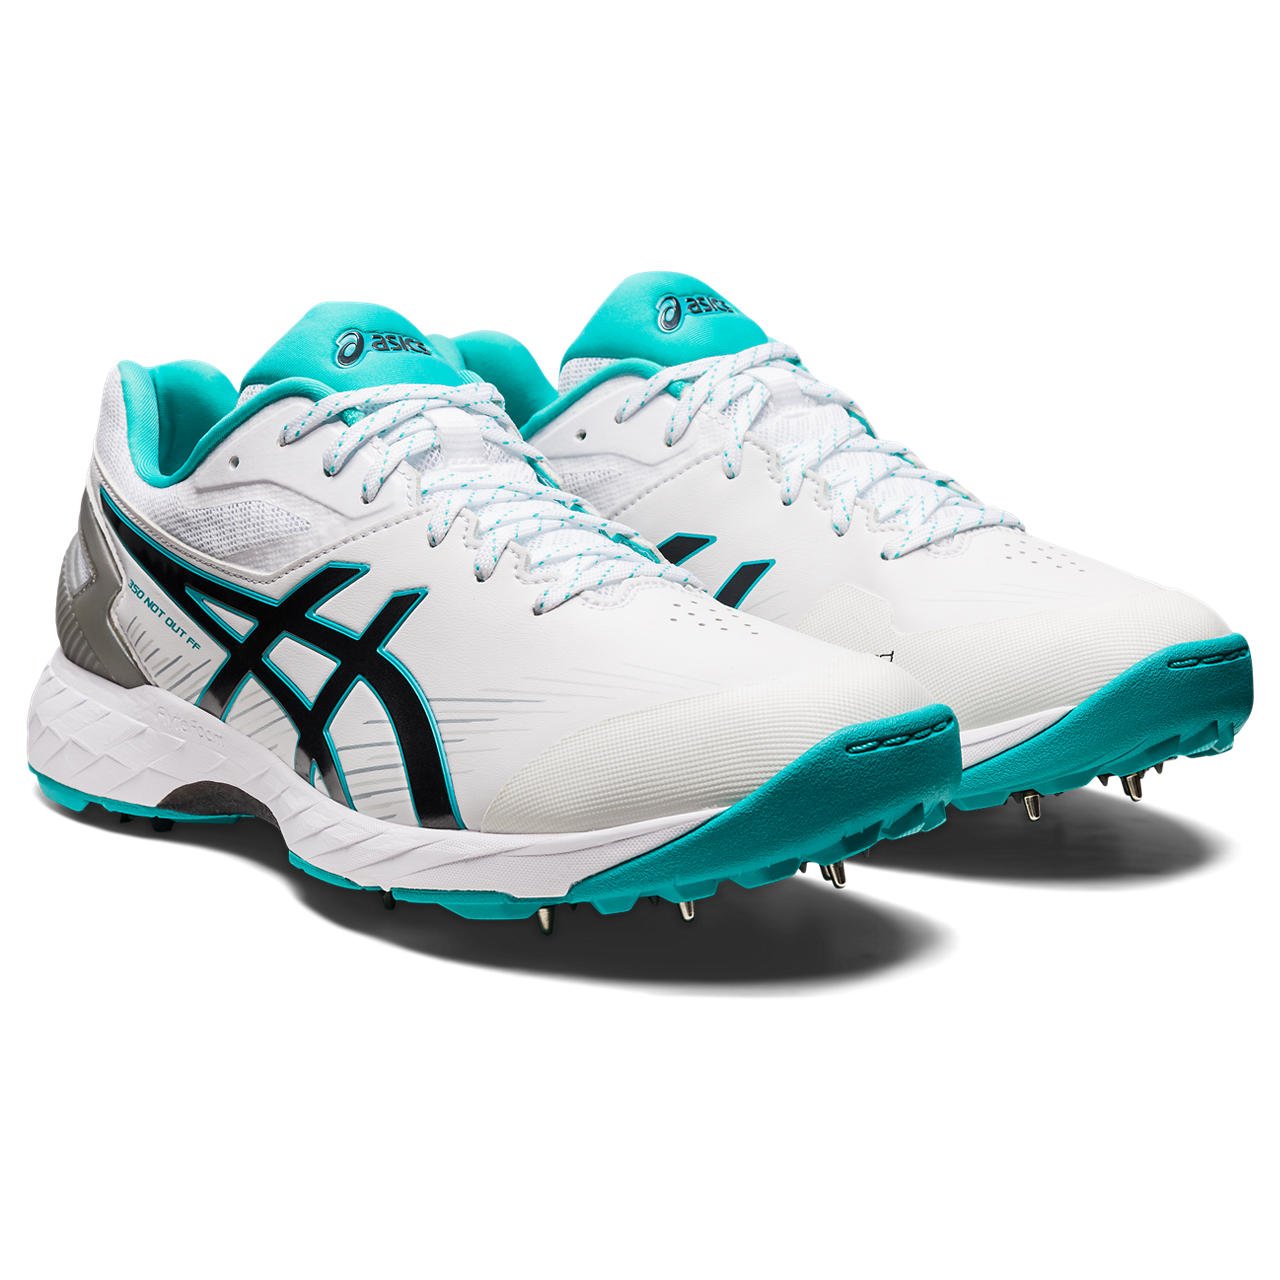 Asics Gel 350 Not Out Cricket Spikes White/Sky Blue - The Cricket Warehouse